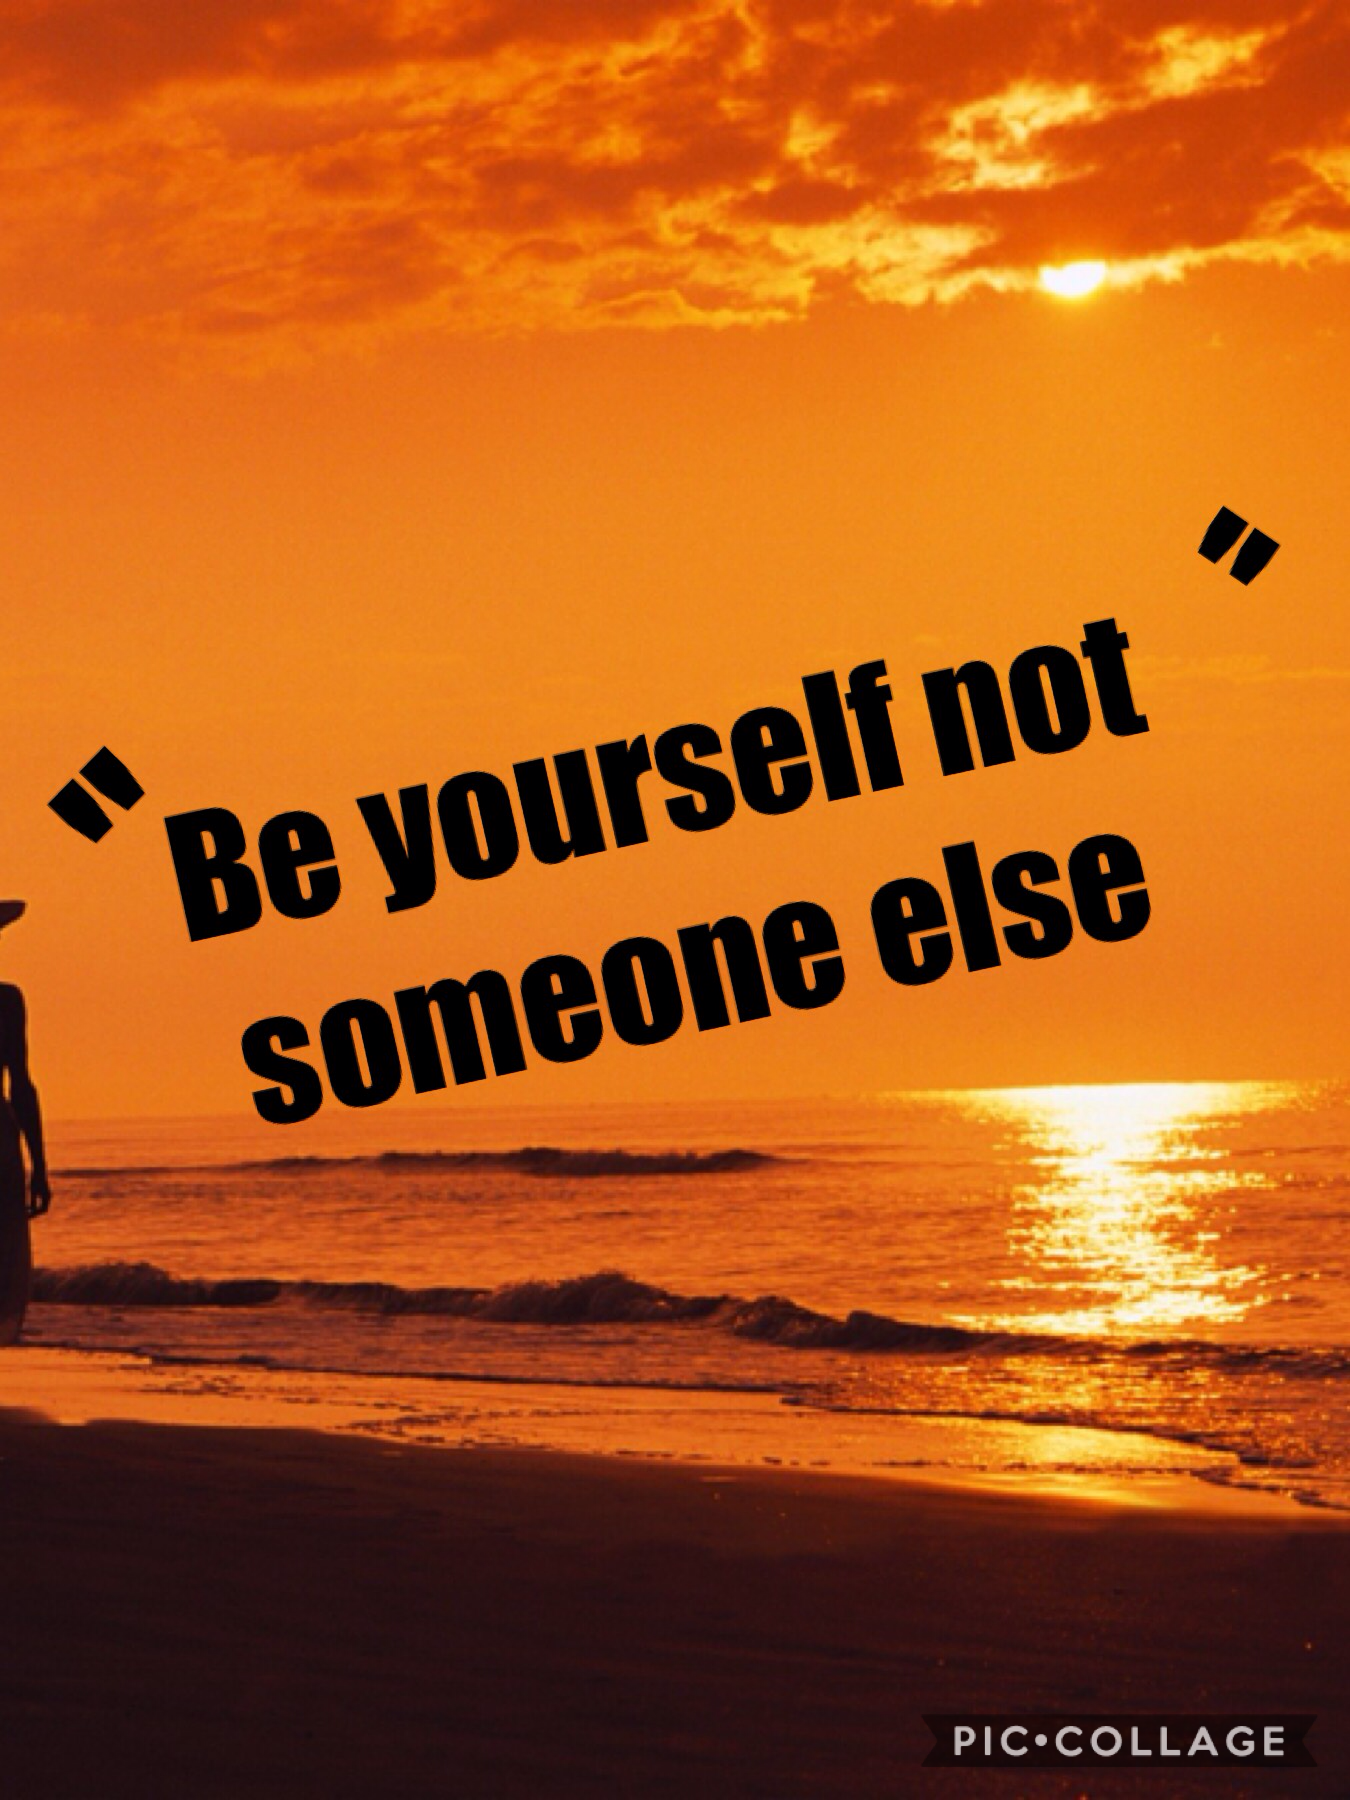 Quotes "Be yourself not someone else "